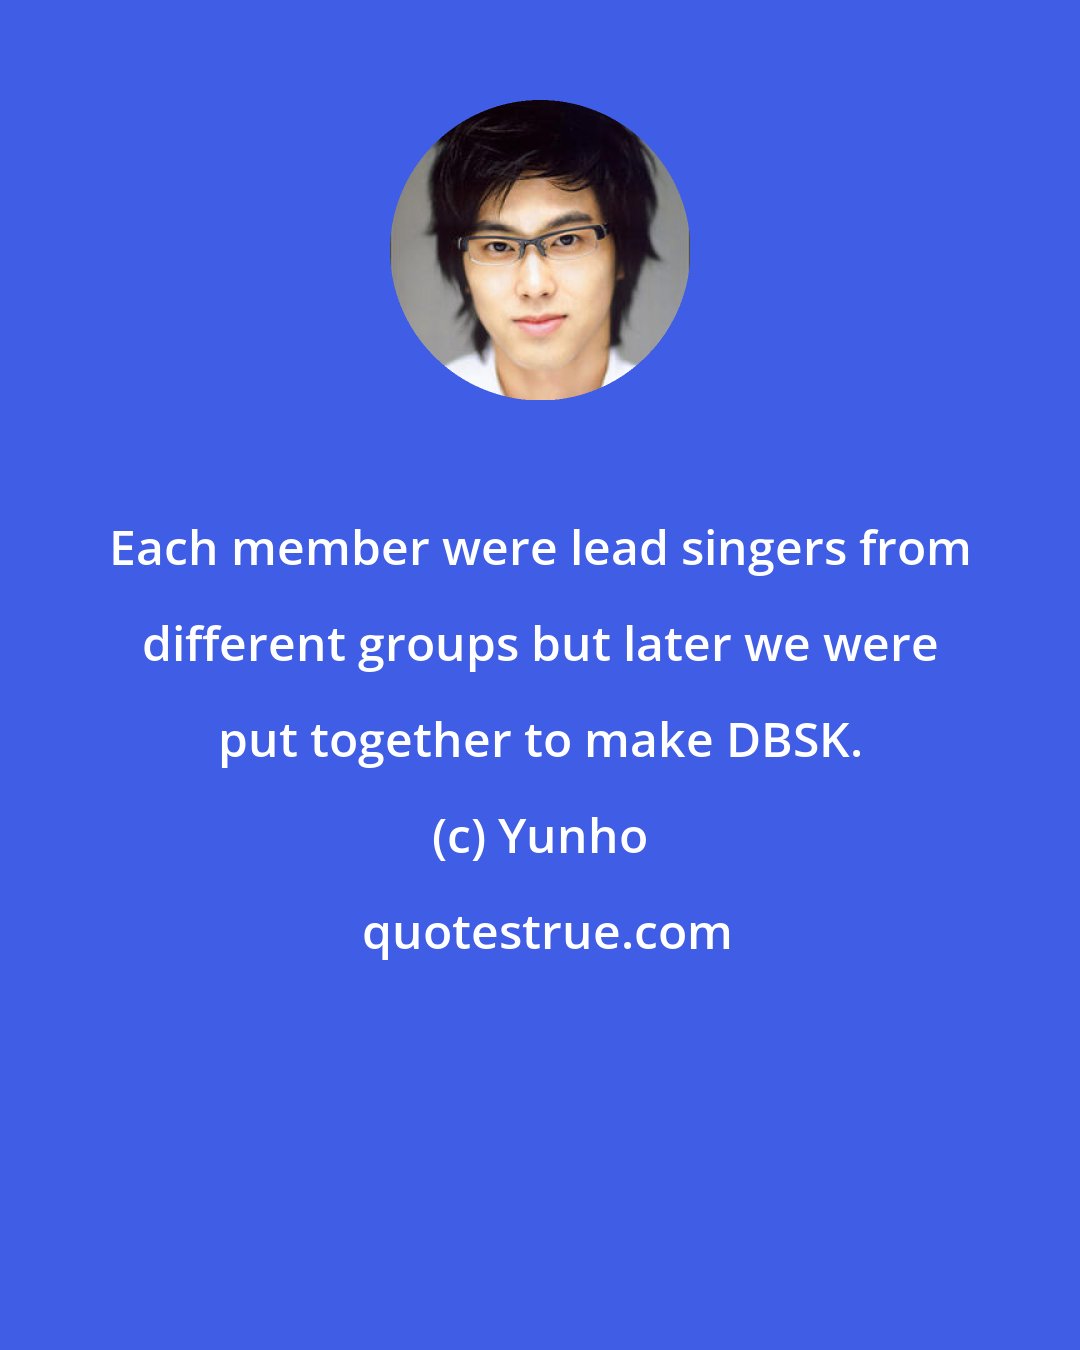 Yunho: Each member were lead singers from different groups but later we were put together to make DBSK.